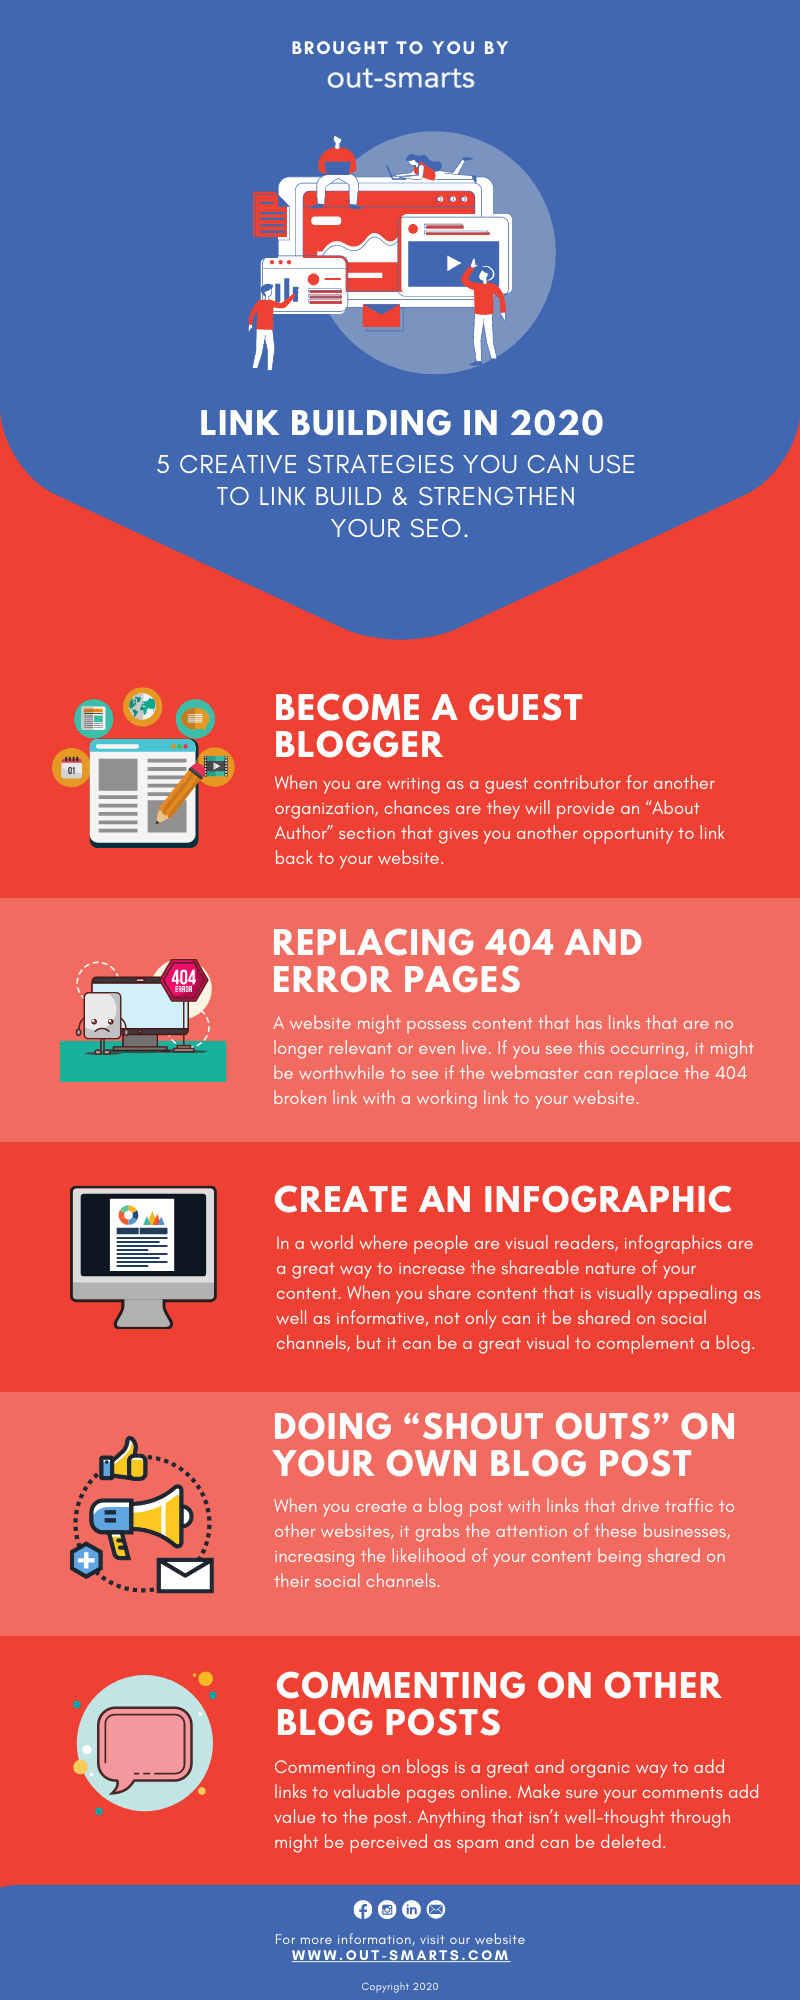 5 link building strategies - an infographic